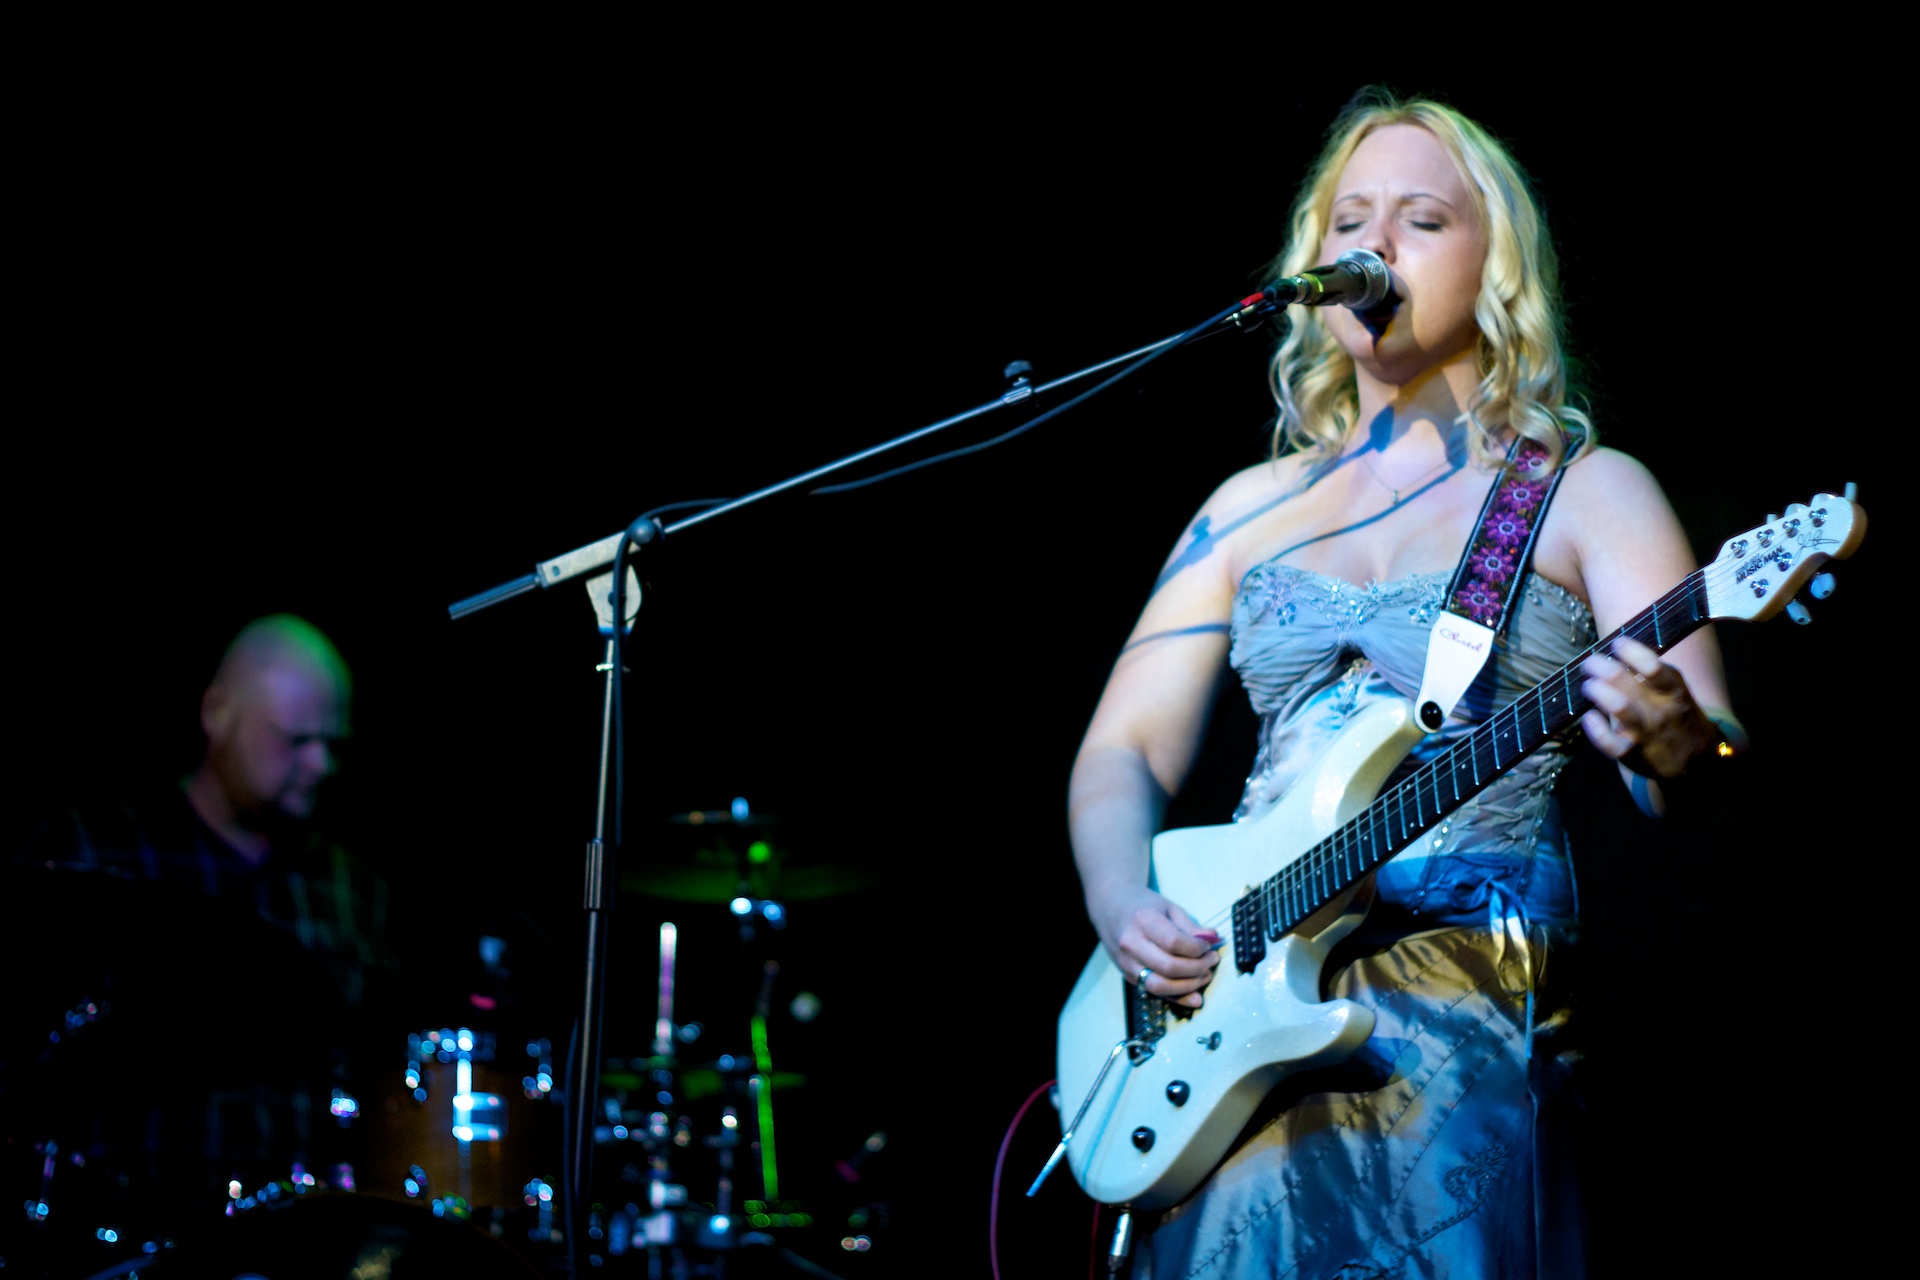 woman with long blonde hair playing guitar in front of microphone